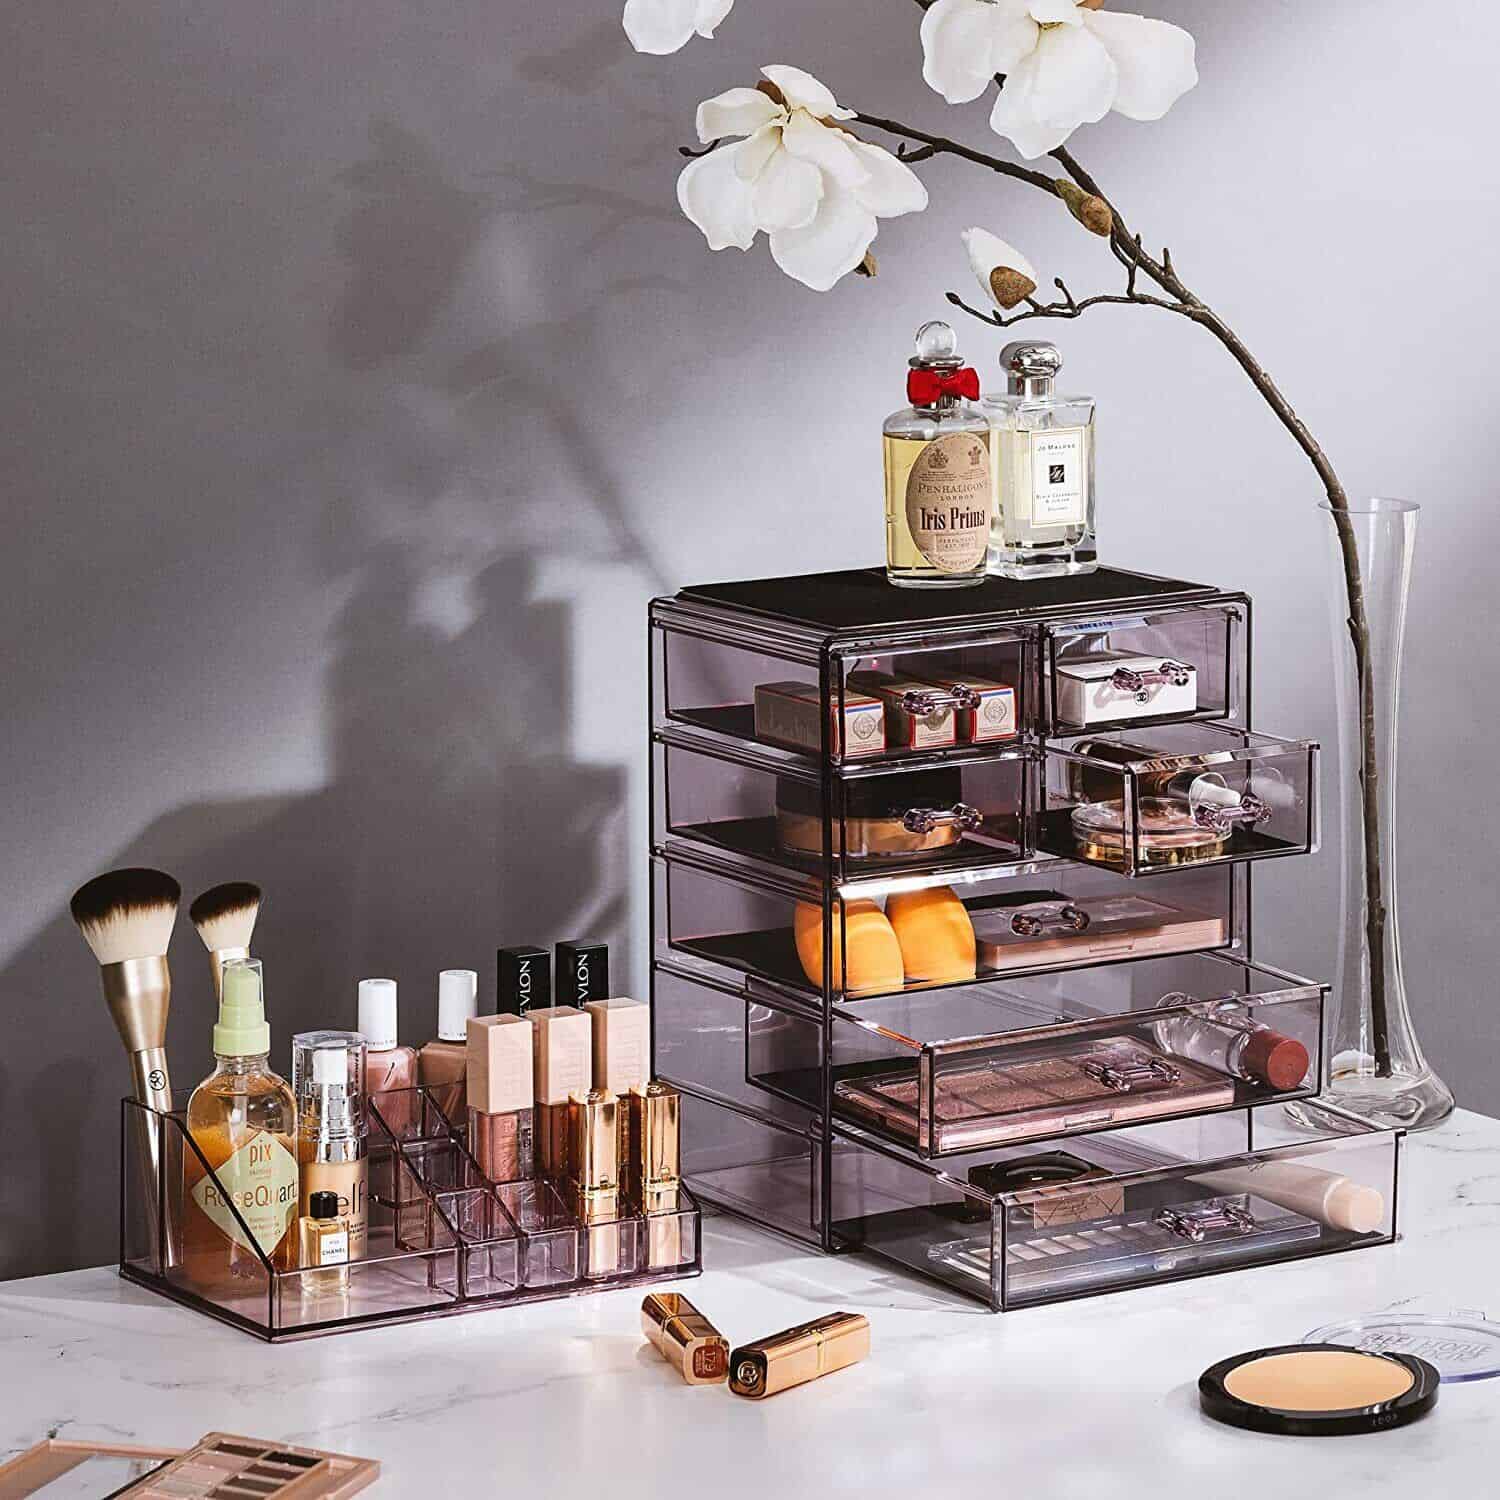 A makeup organizer with several drawers and a flower.